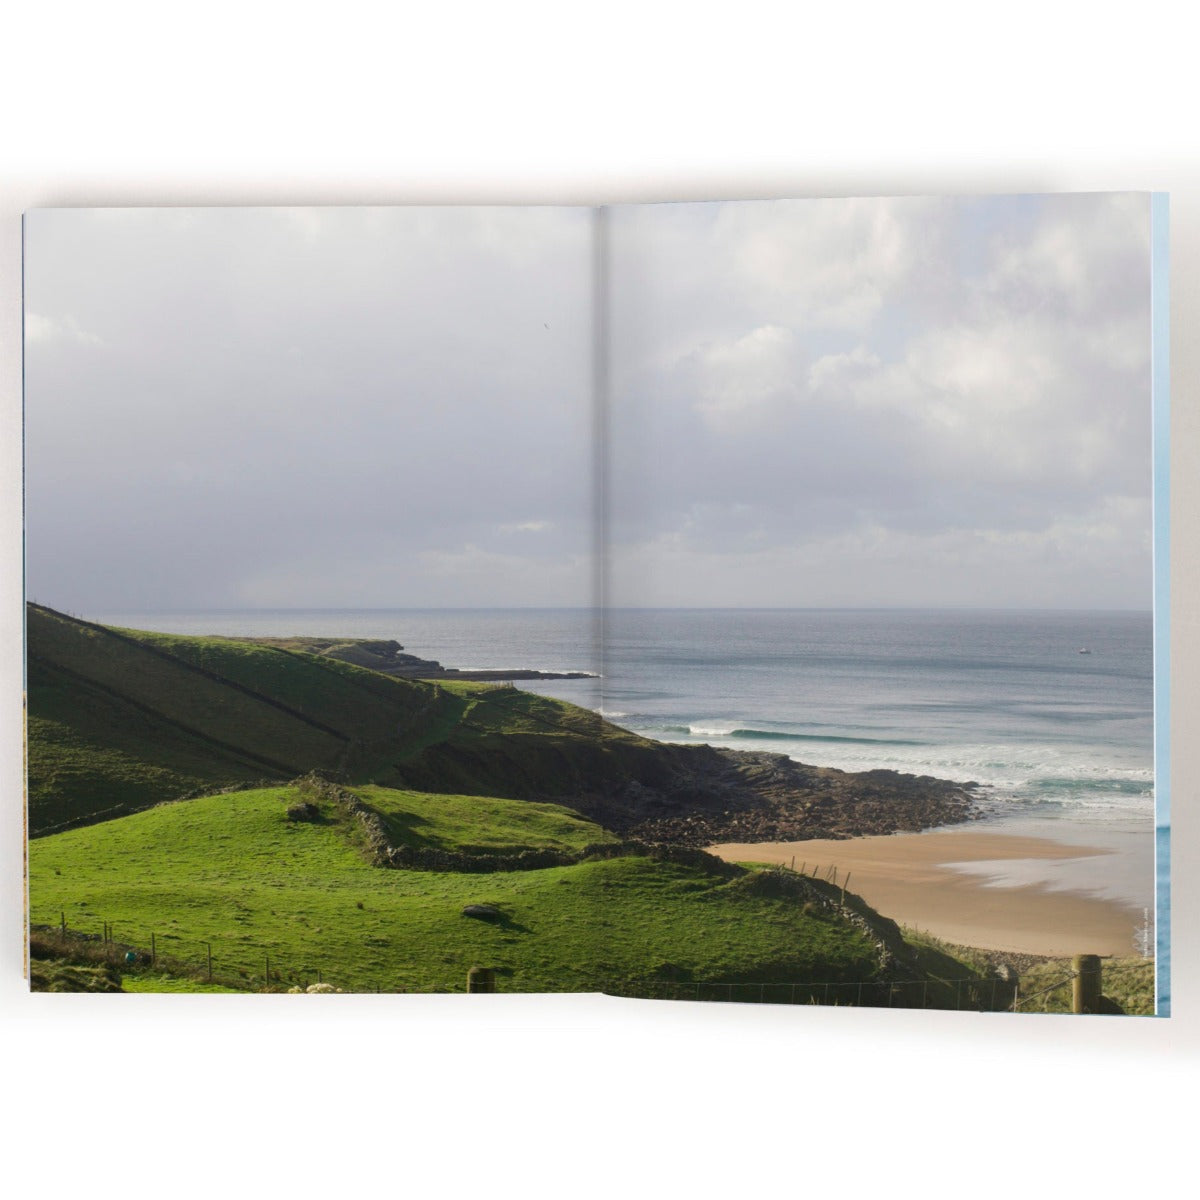 i-love-the-seaside=great-britain-and-ireland-surf-travel-guide-book-content3